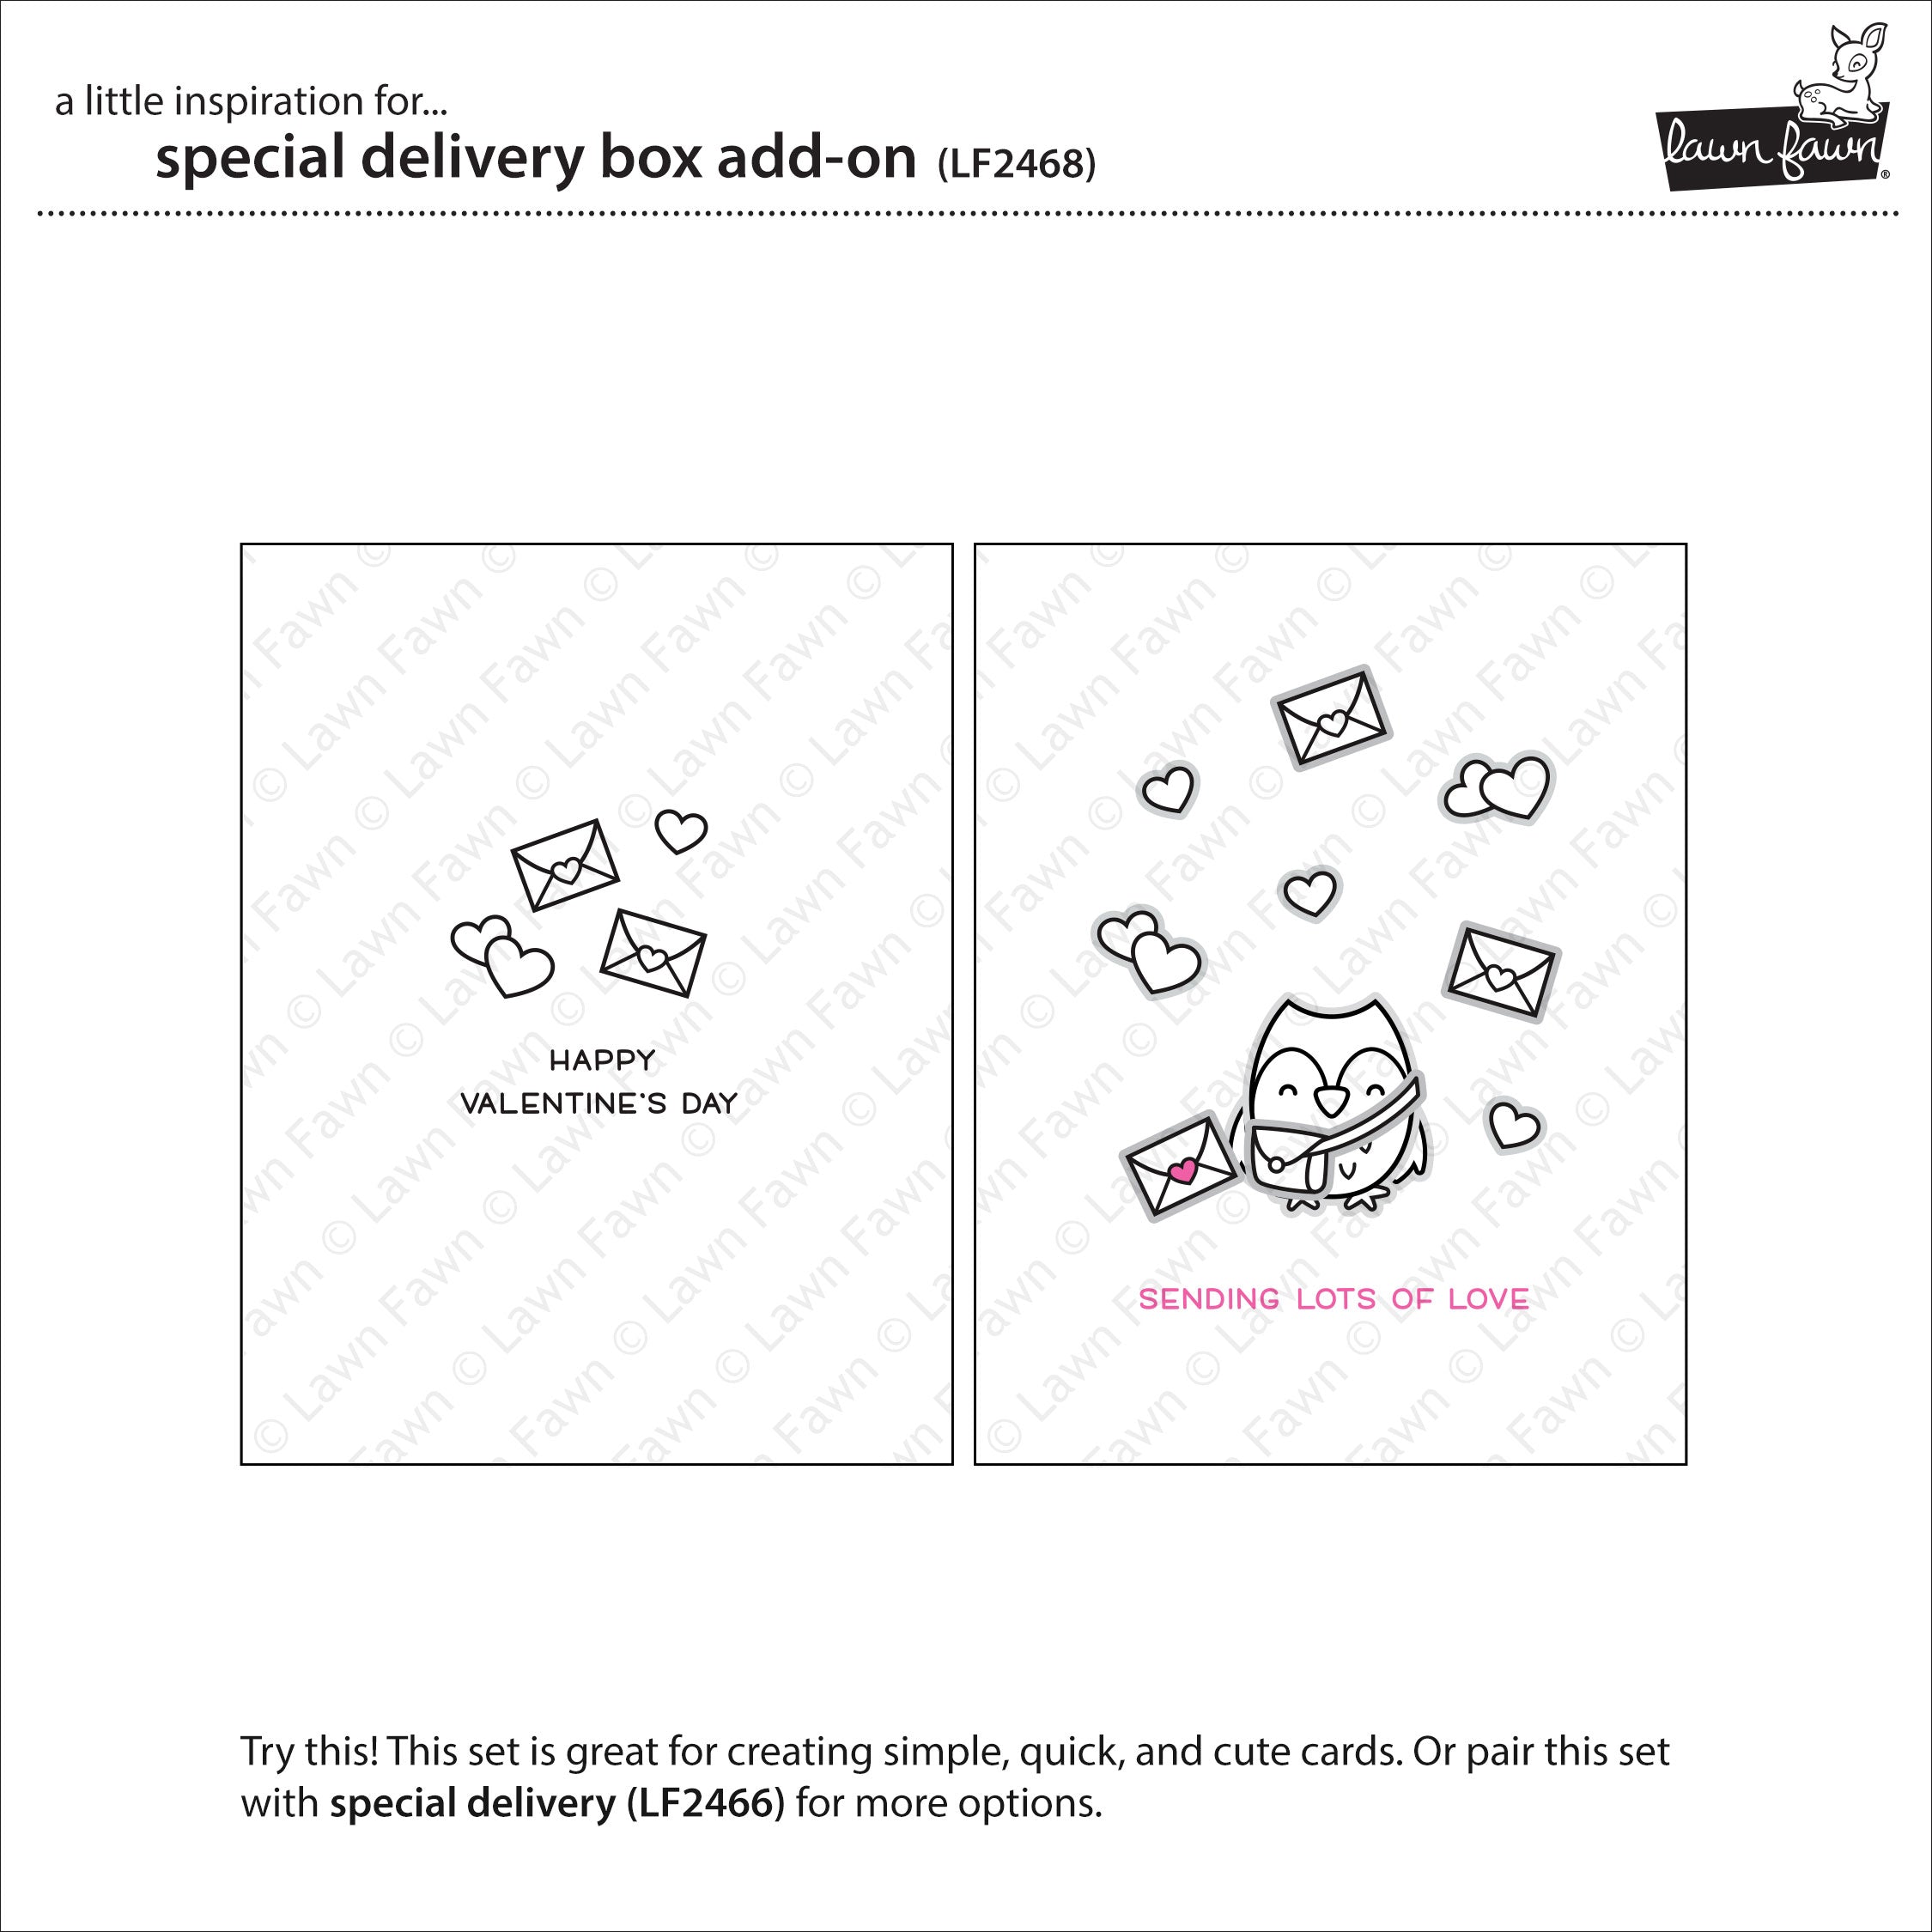 special delivery box add-on